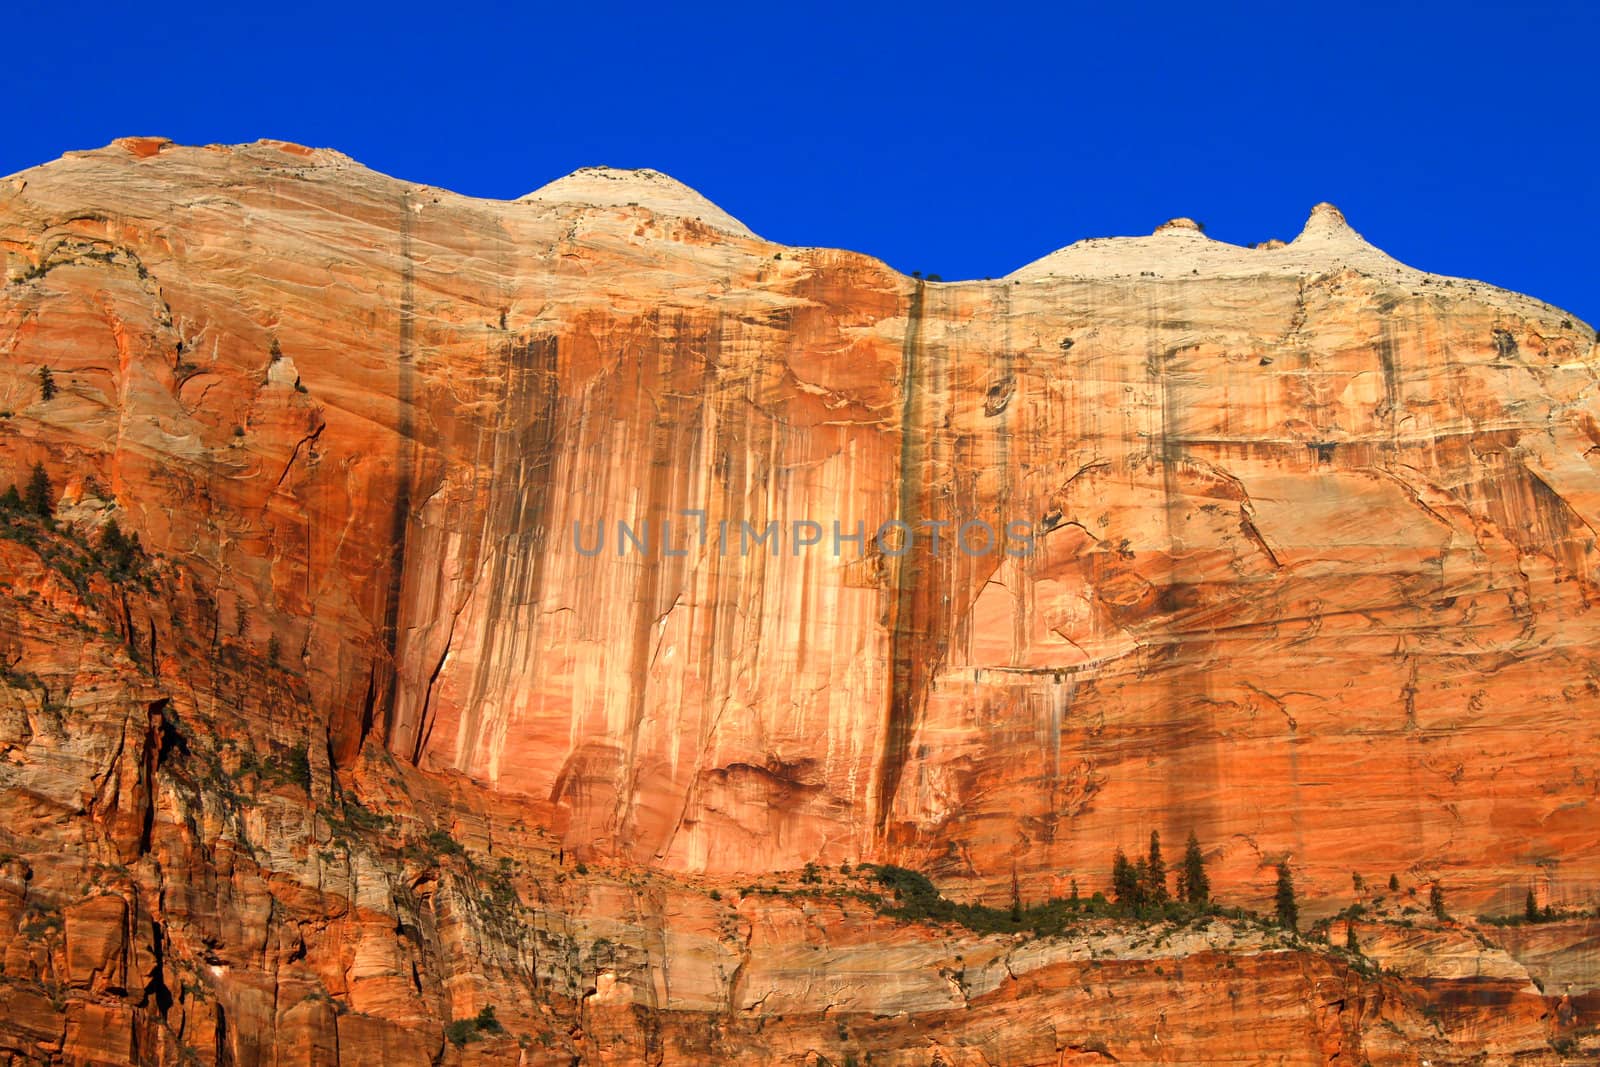 Cliff known as the Streaked wall of Zion National Park in Utah.